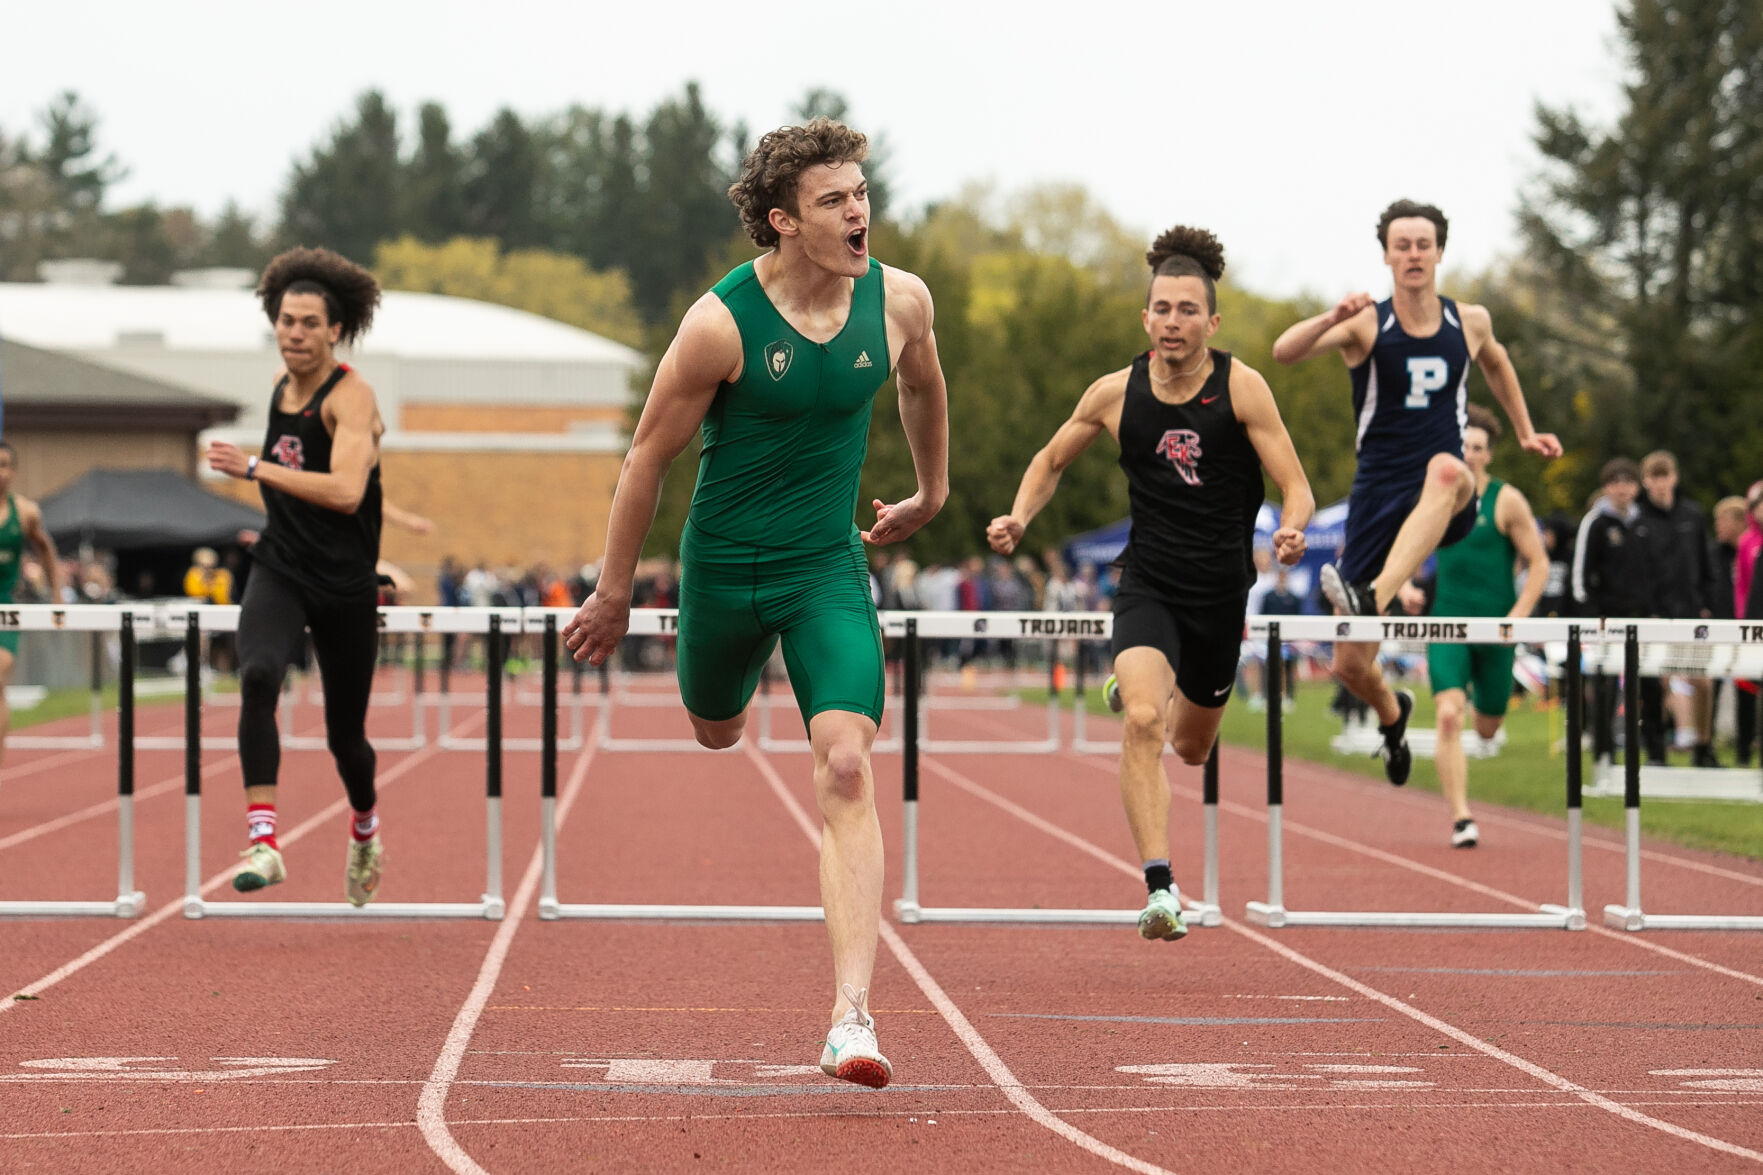 Top High School Track Results: Standout Performances and Records